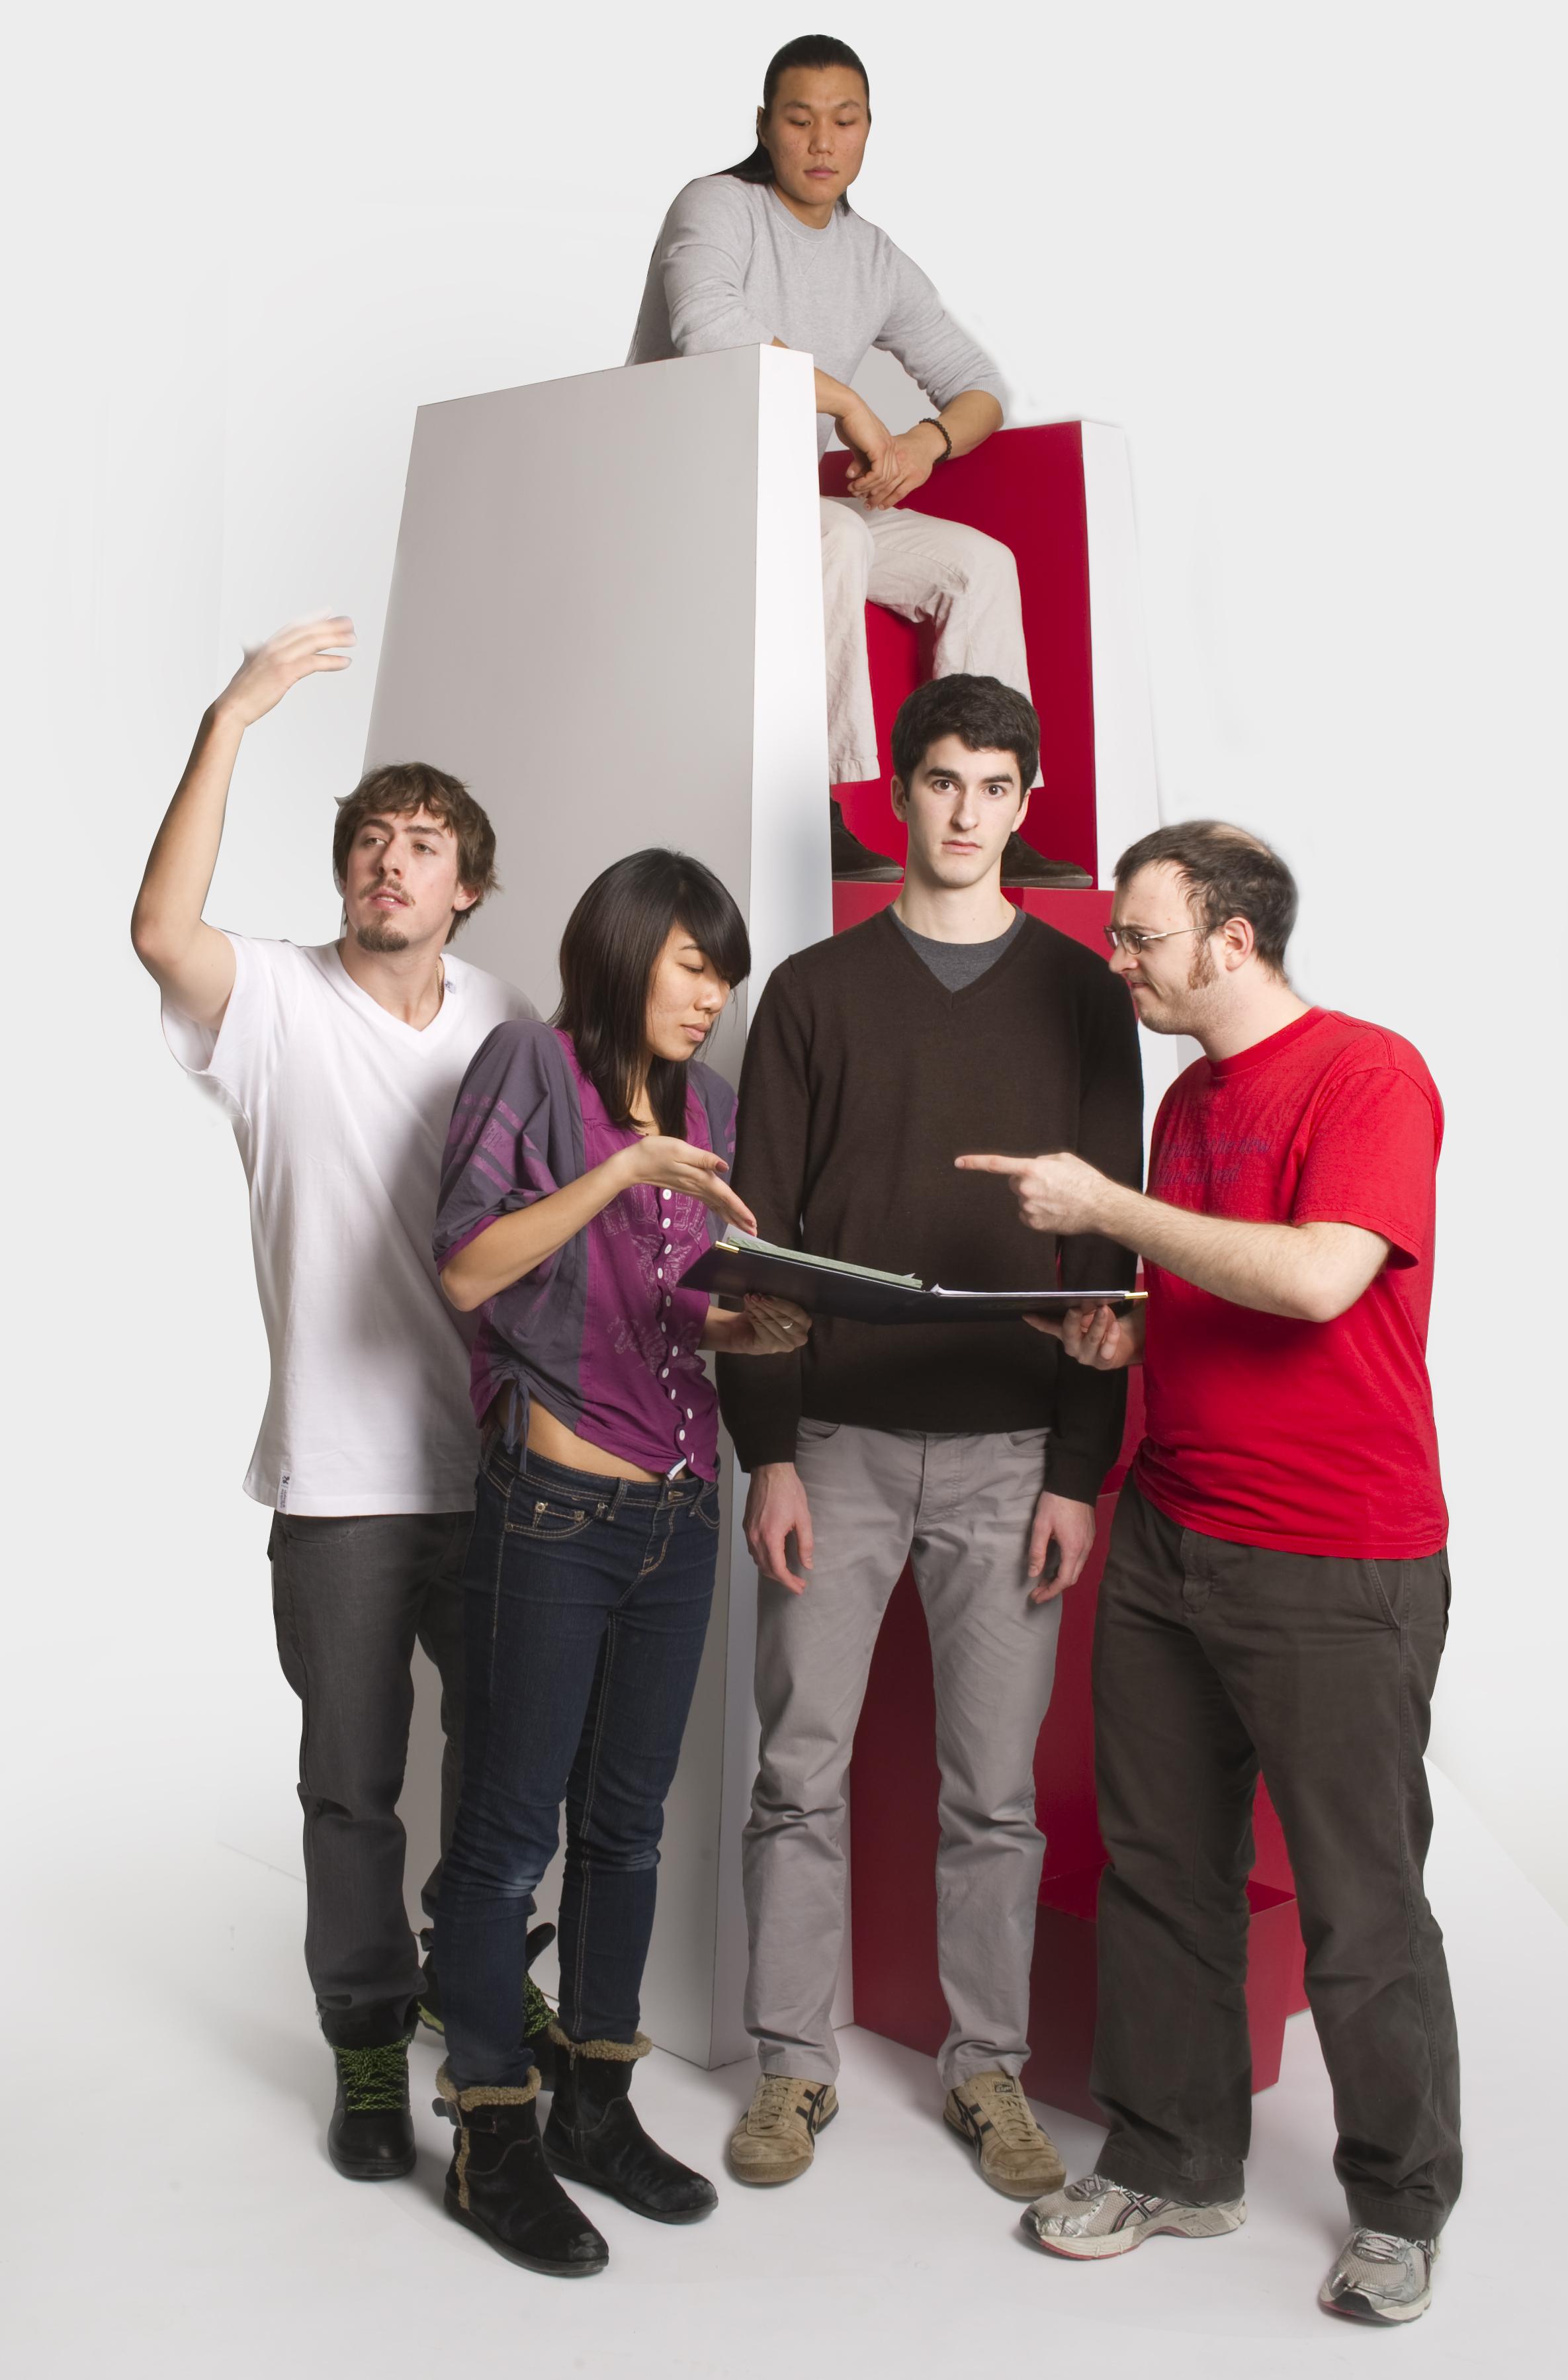 A group of people use a vertically-oriented chair design.